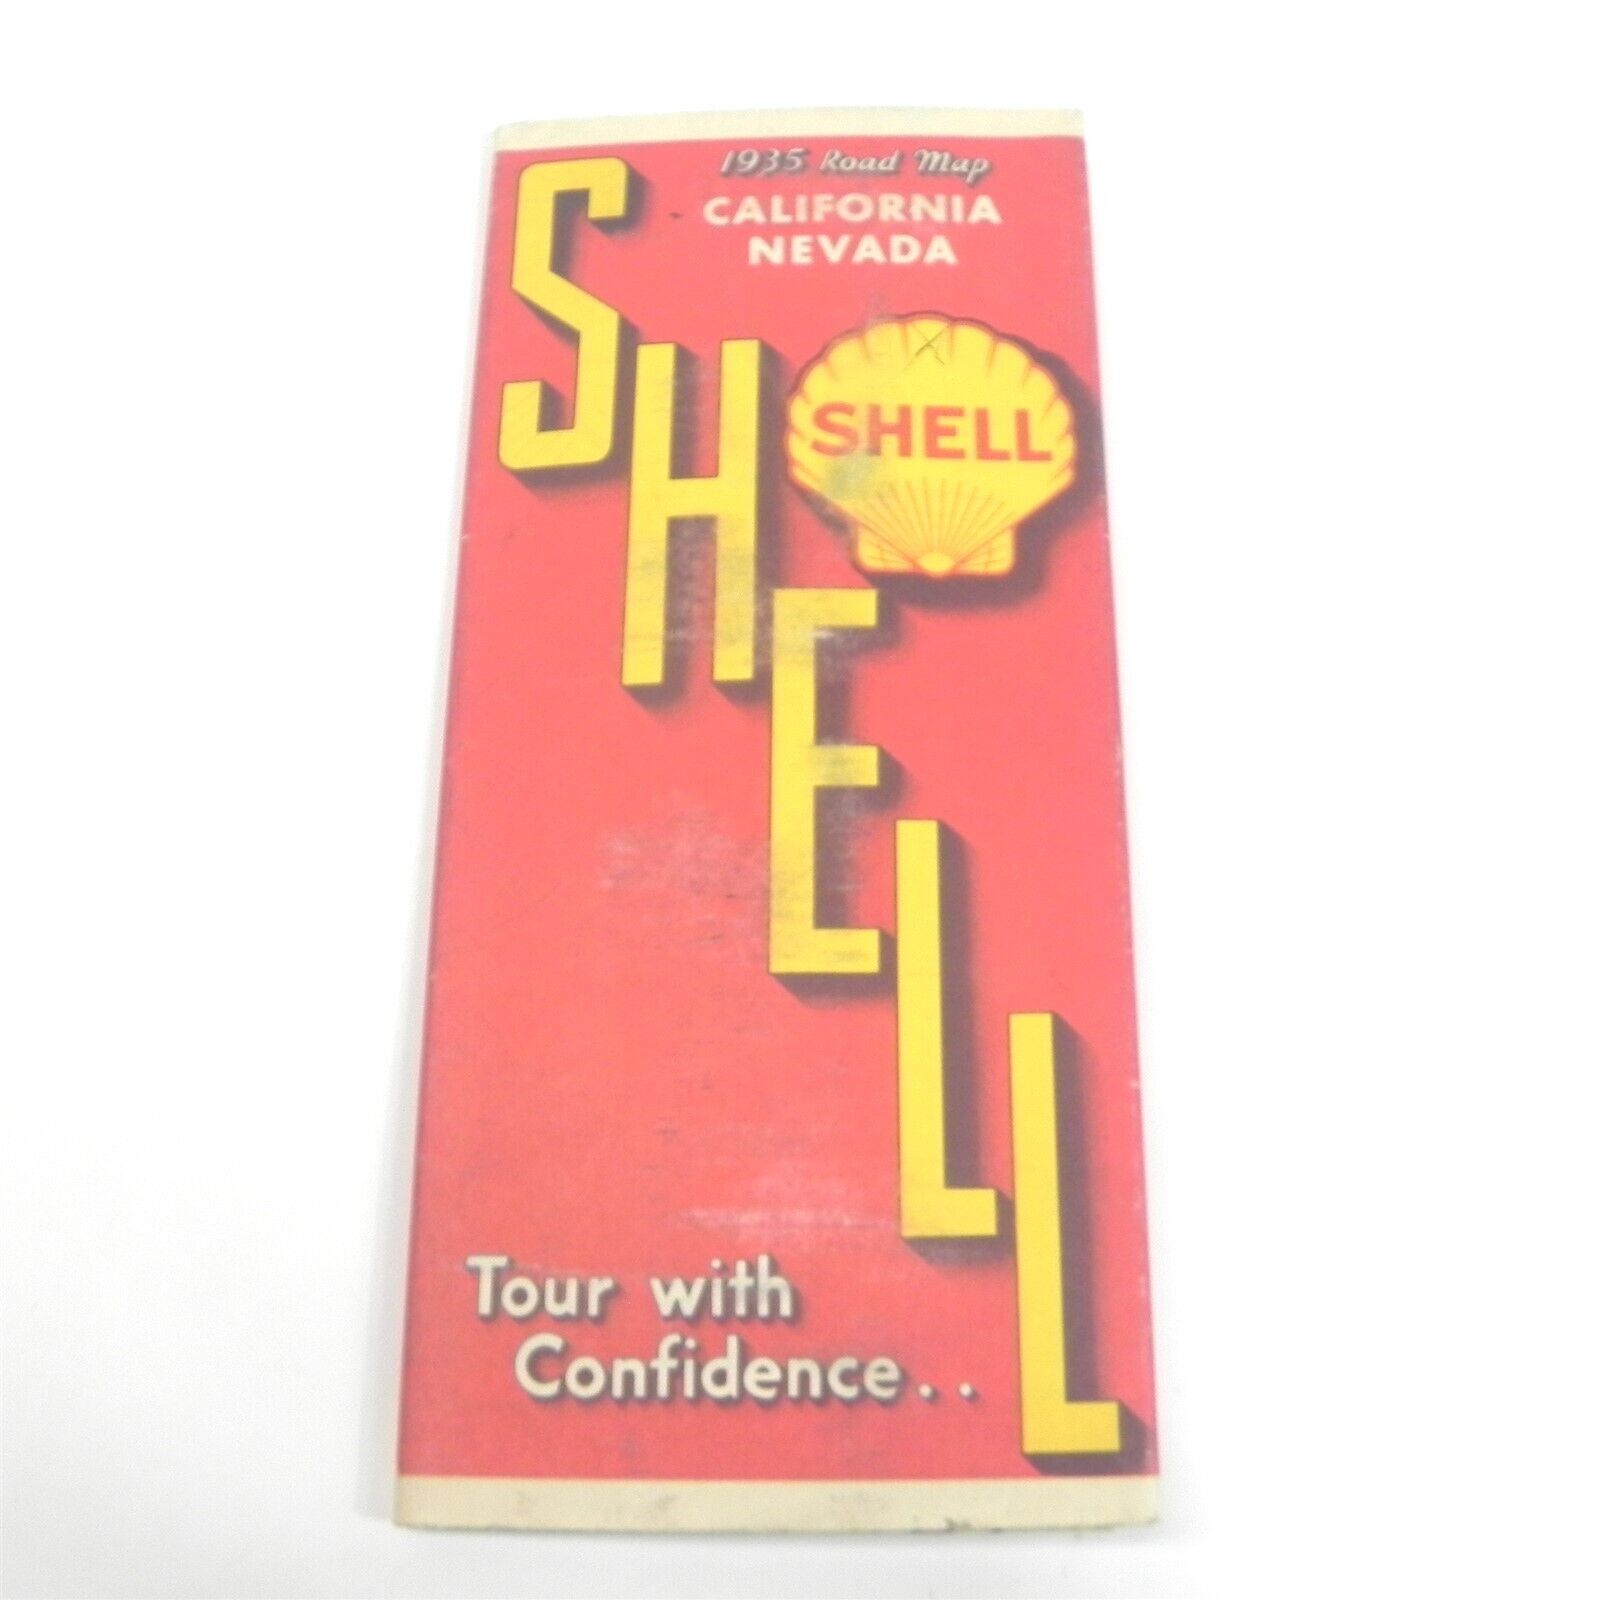 VINTAGE 1935 SHELL OIL COMPANY MAP OF CALIFORNIA NEVADA TOURING GUIDE GAS OIL